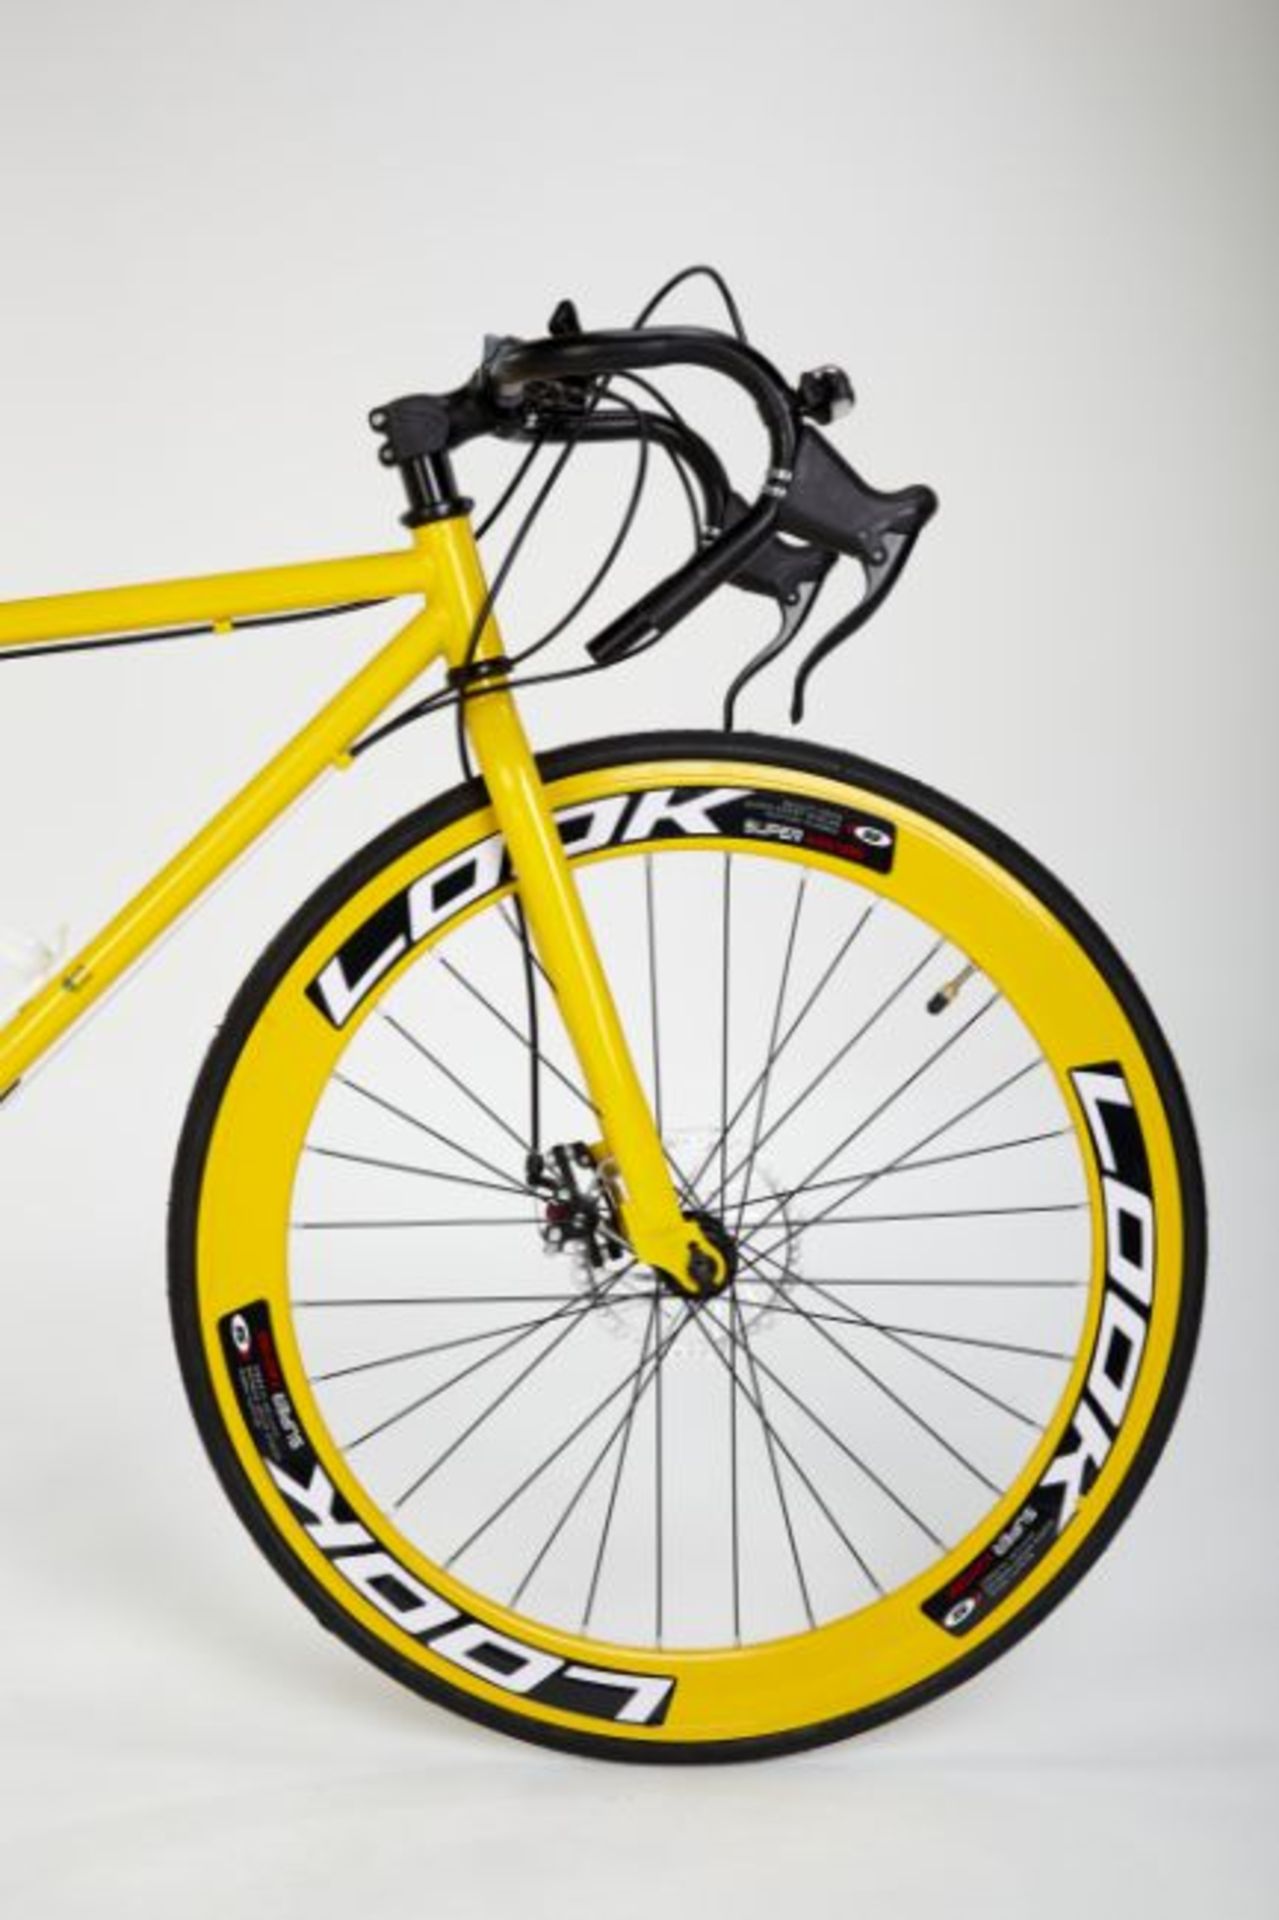 YELLOW STREET BIKE WITH 21 GREAR, BRAKE DISKS, KICK STAND, COOL THIN TYRES - Image 9 of 12